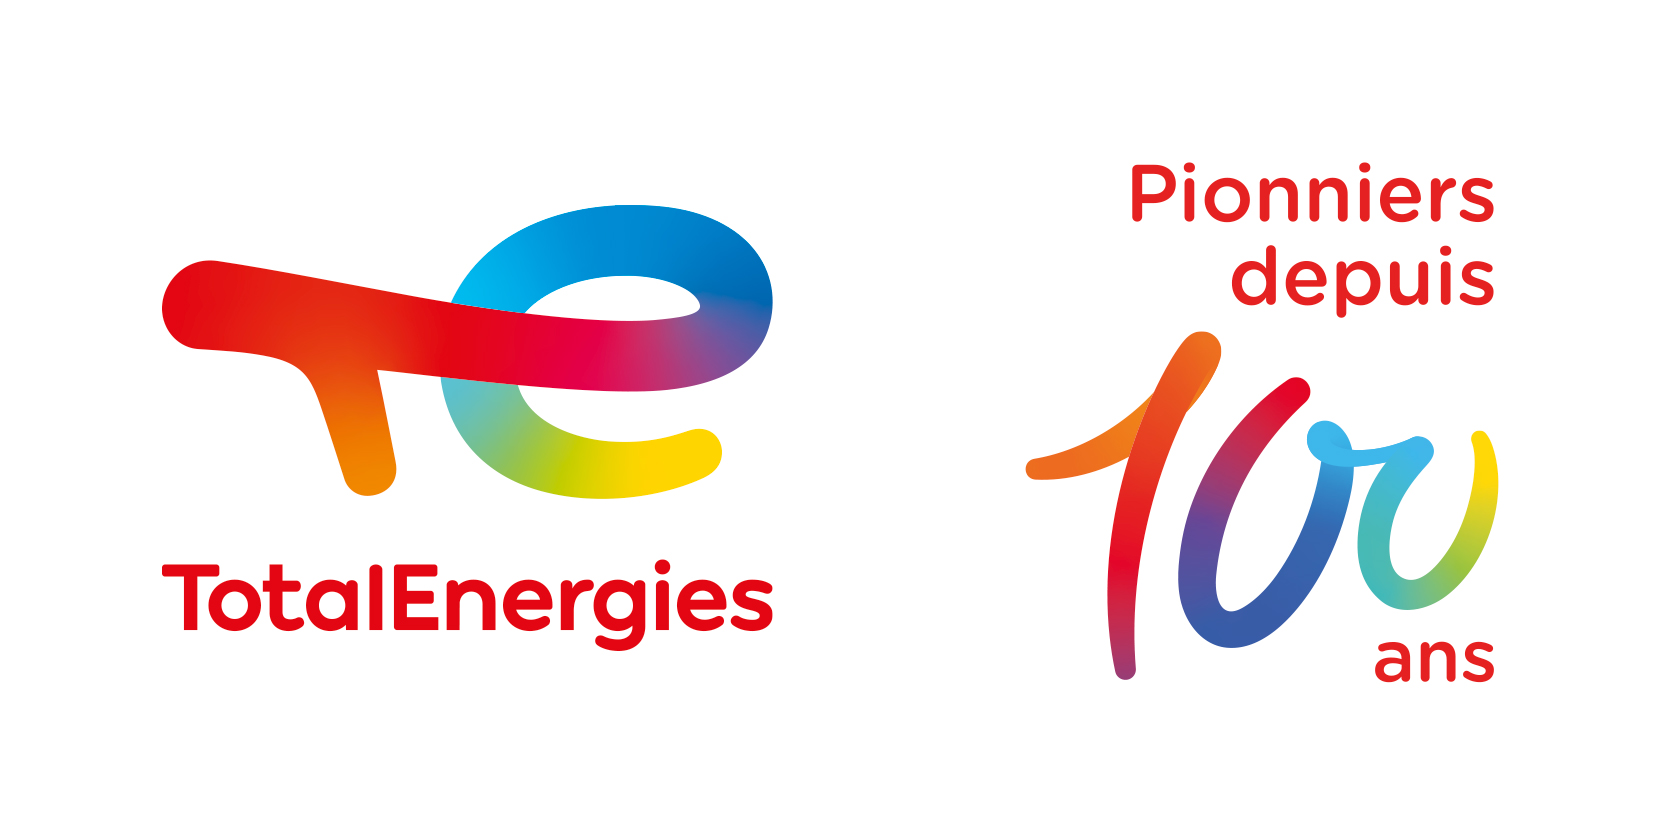 TotalEnergies a 100 ans 